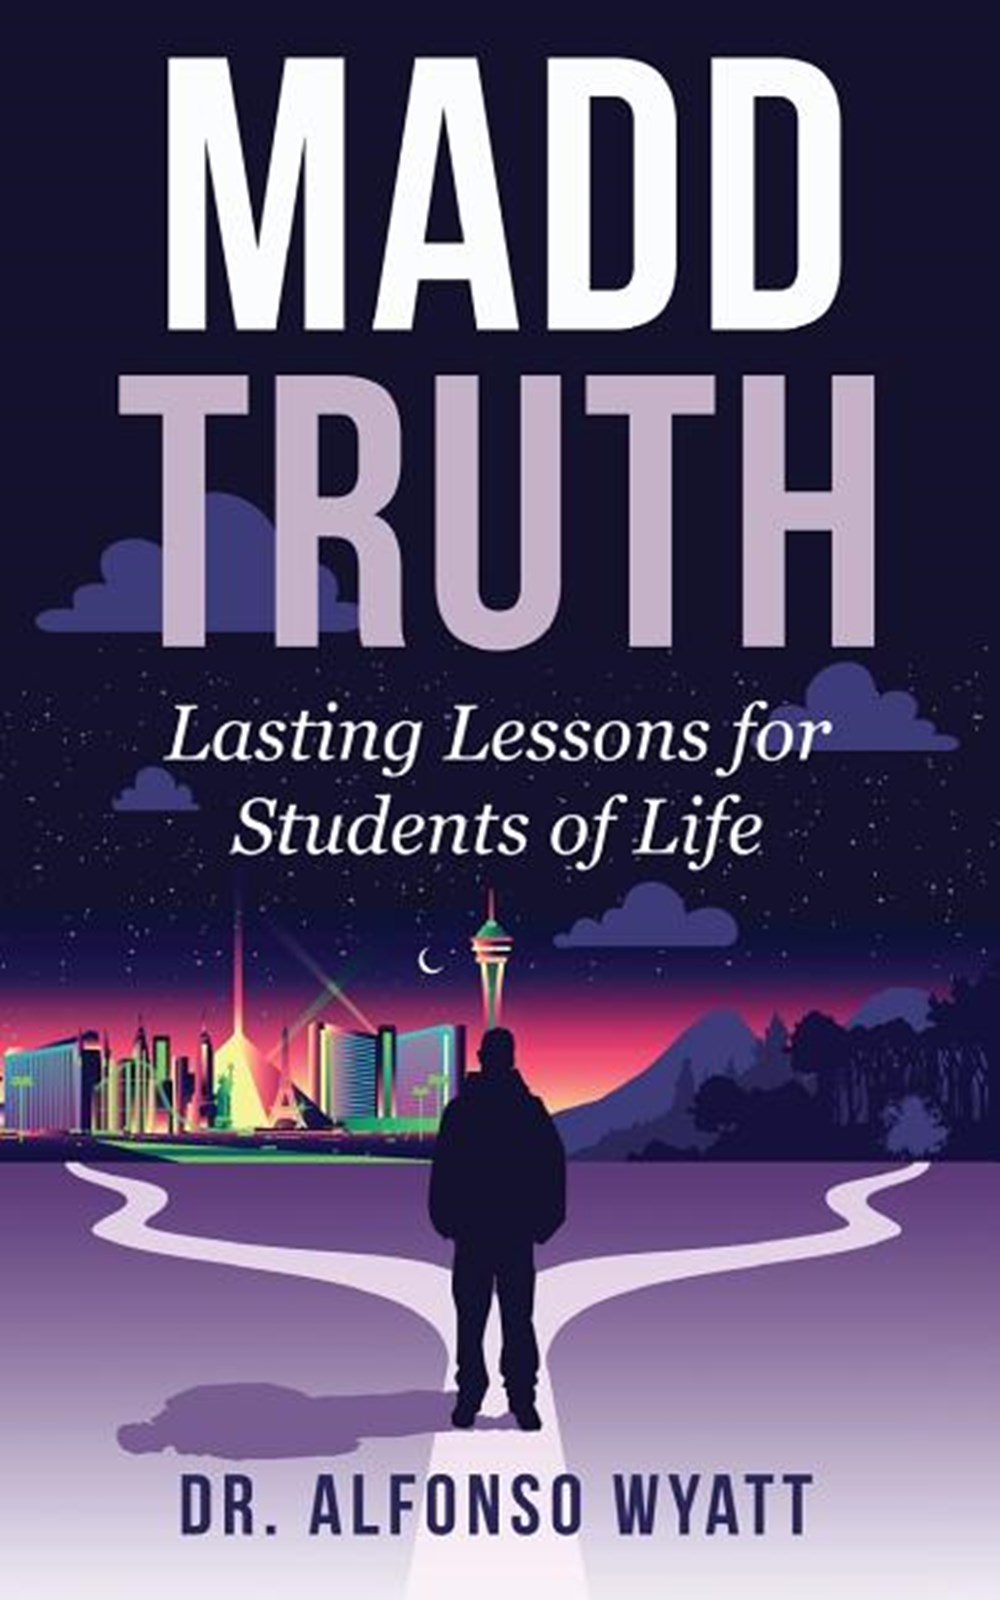 Madd Truth Lasting Lessons for Students of Life